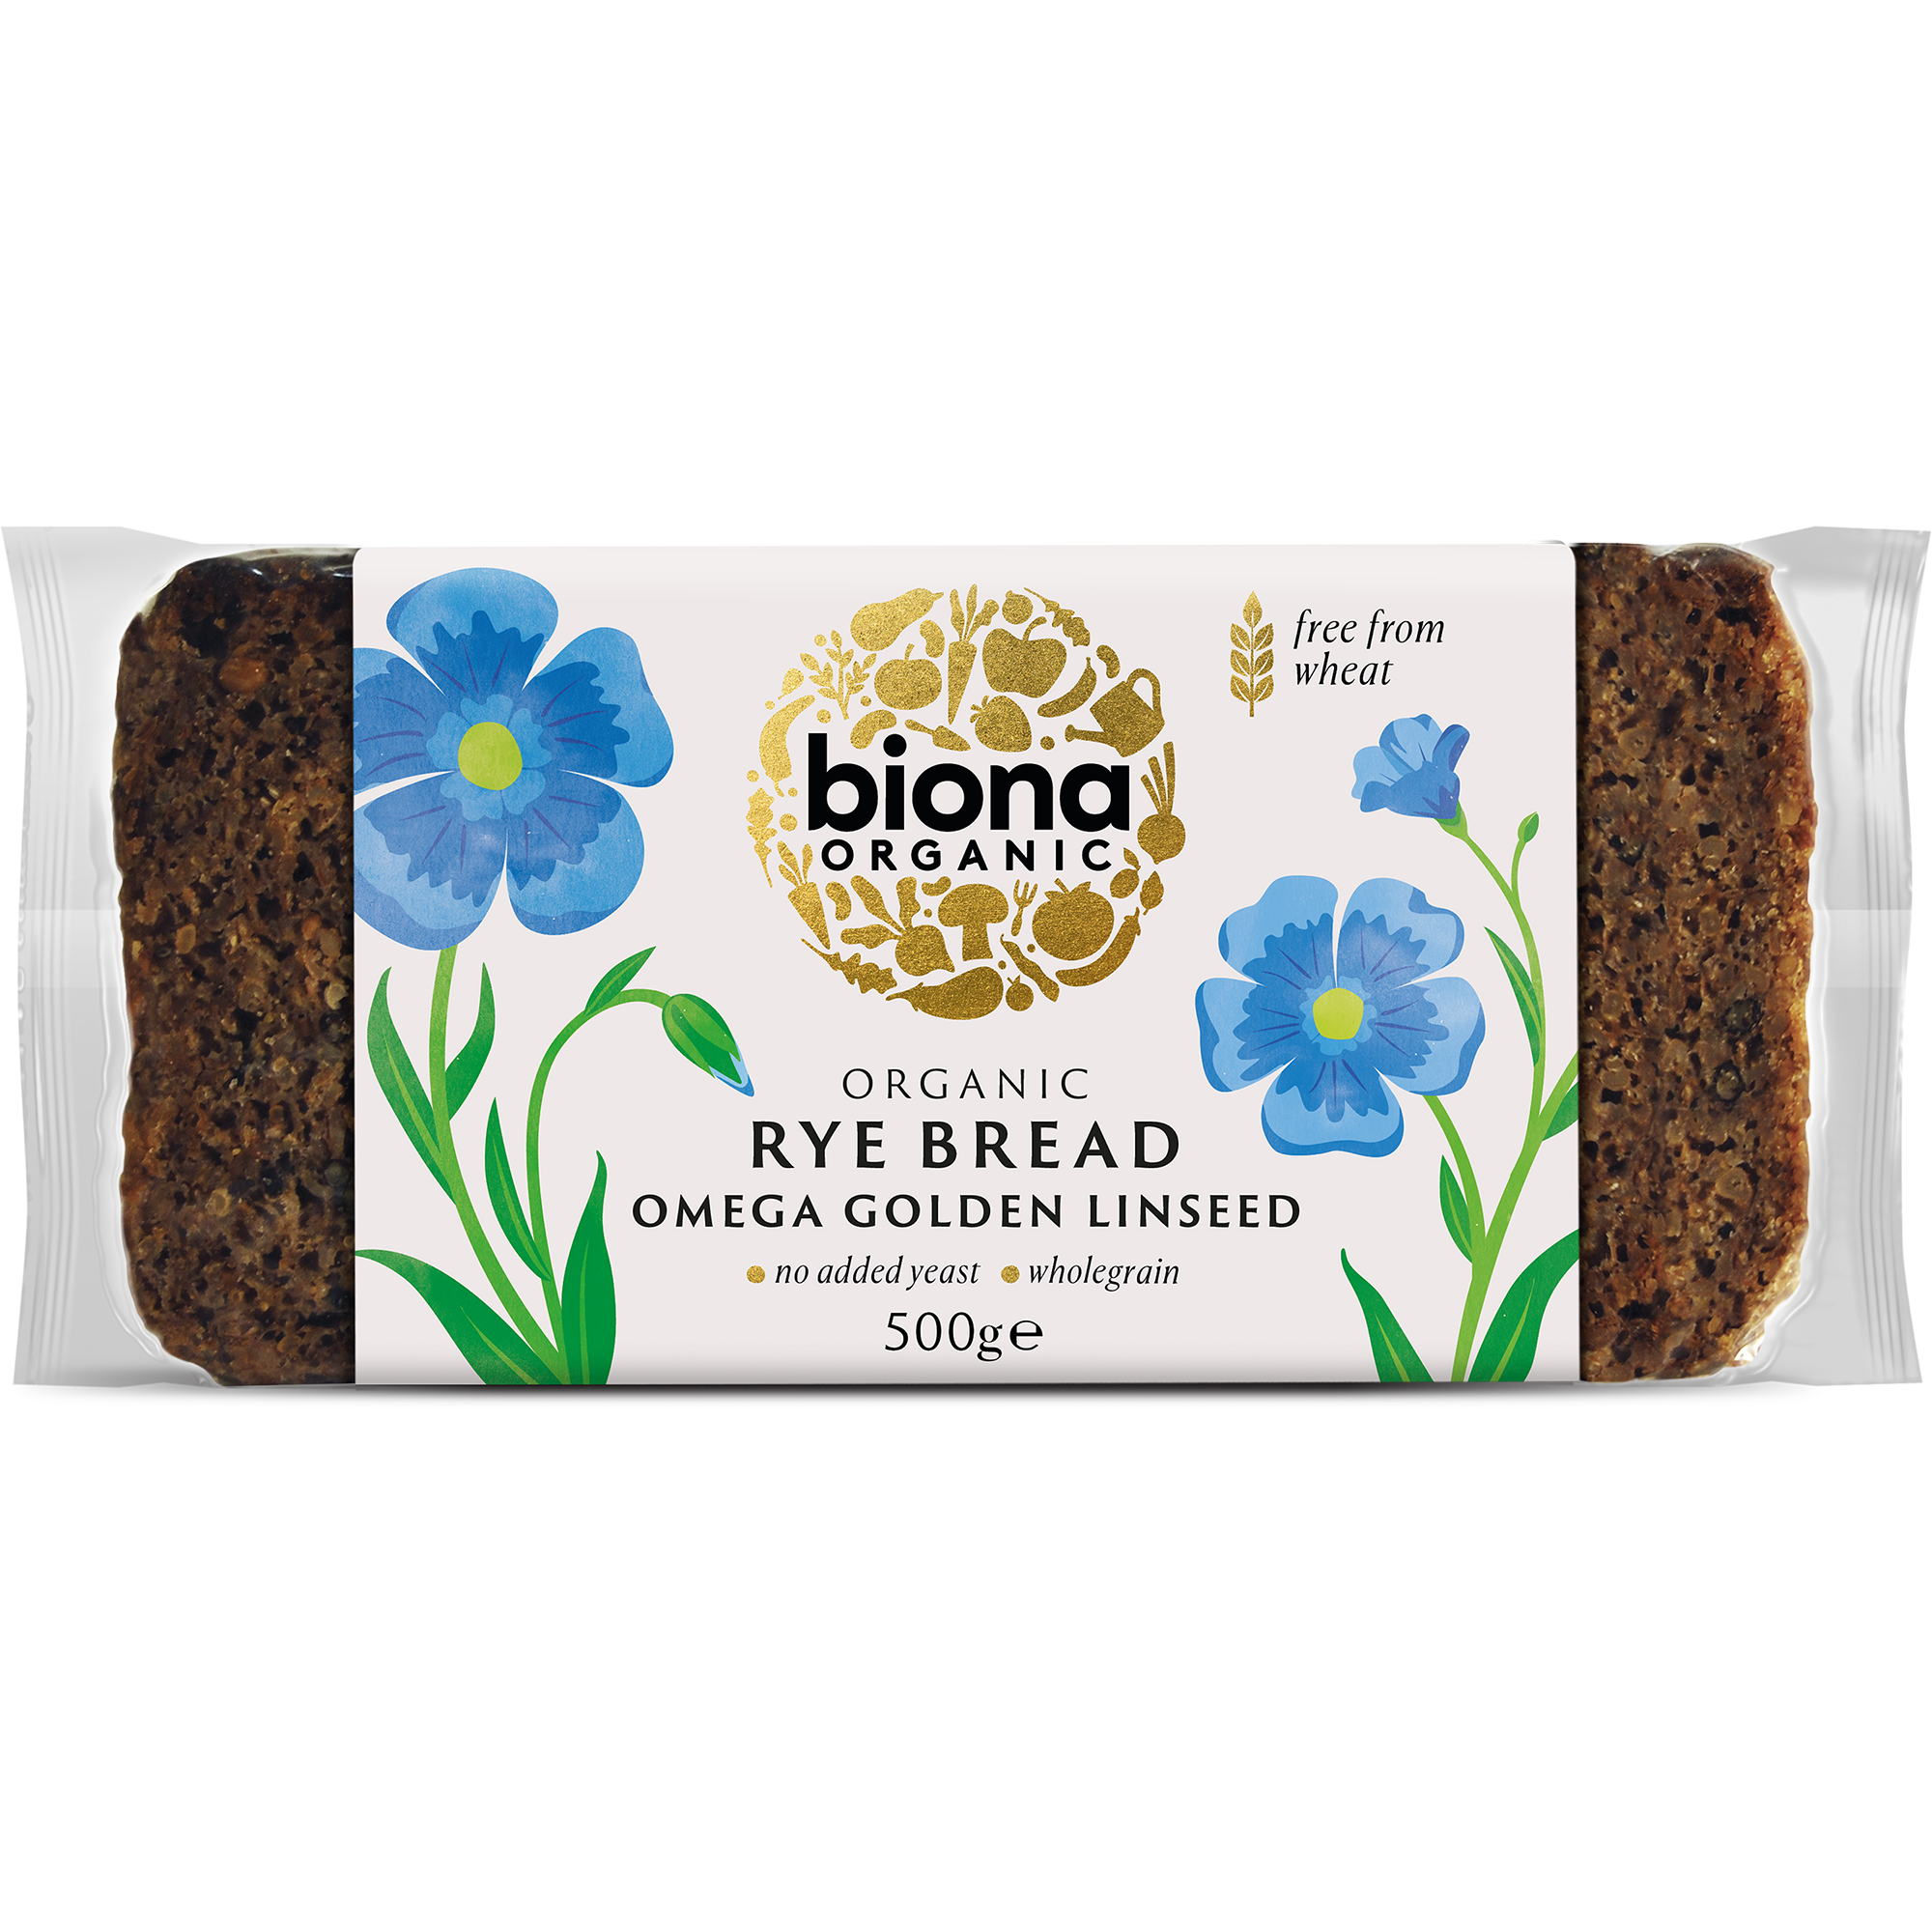 RYE BREAD - OMEGA GOLDEN LINSEED